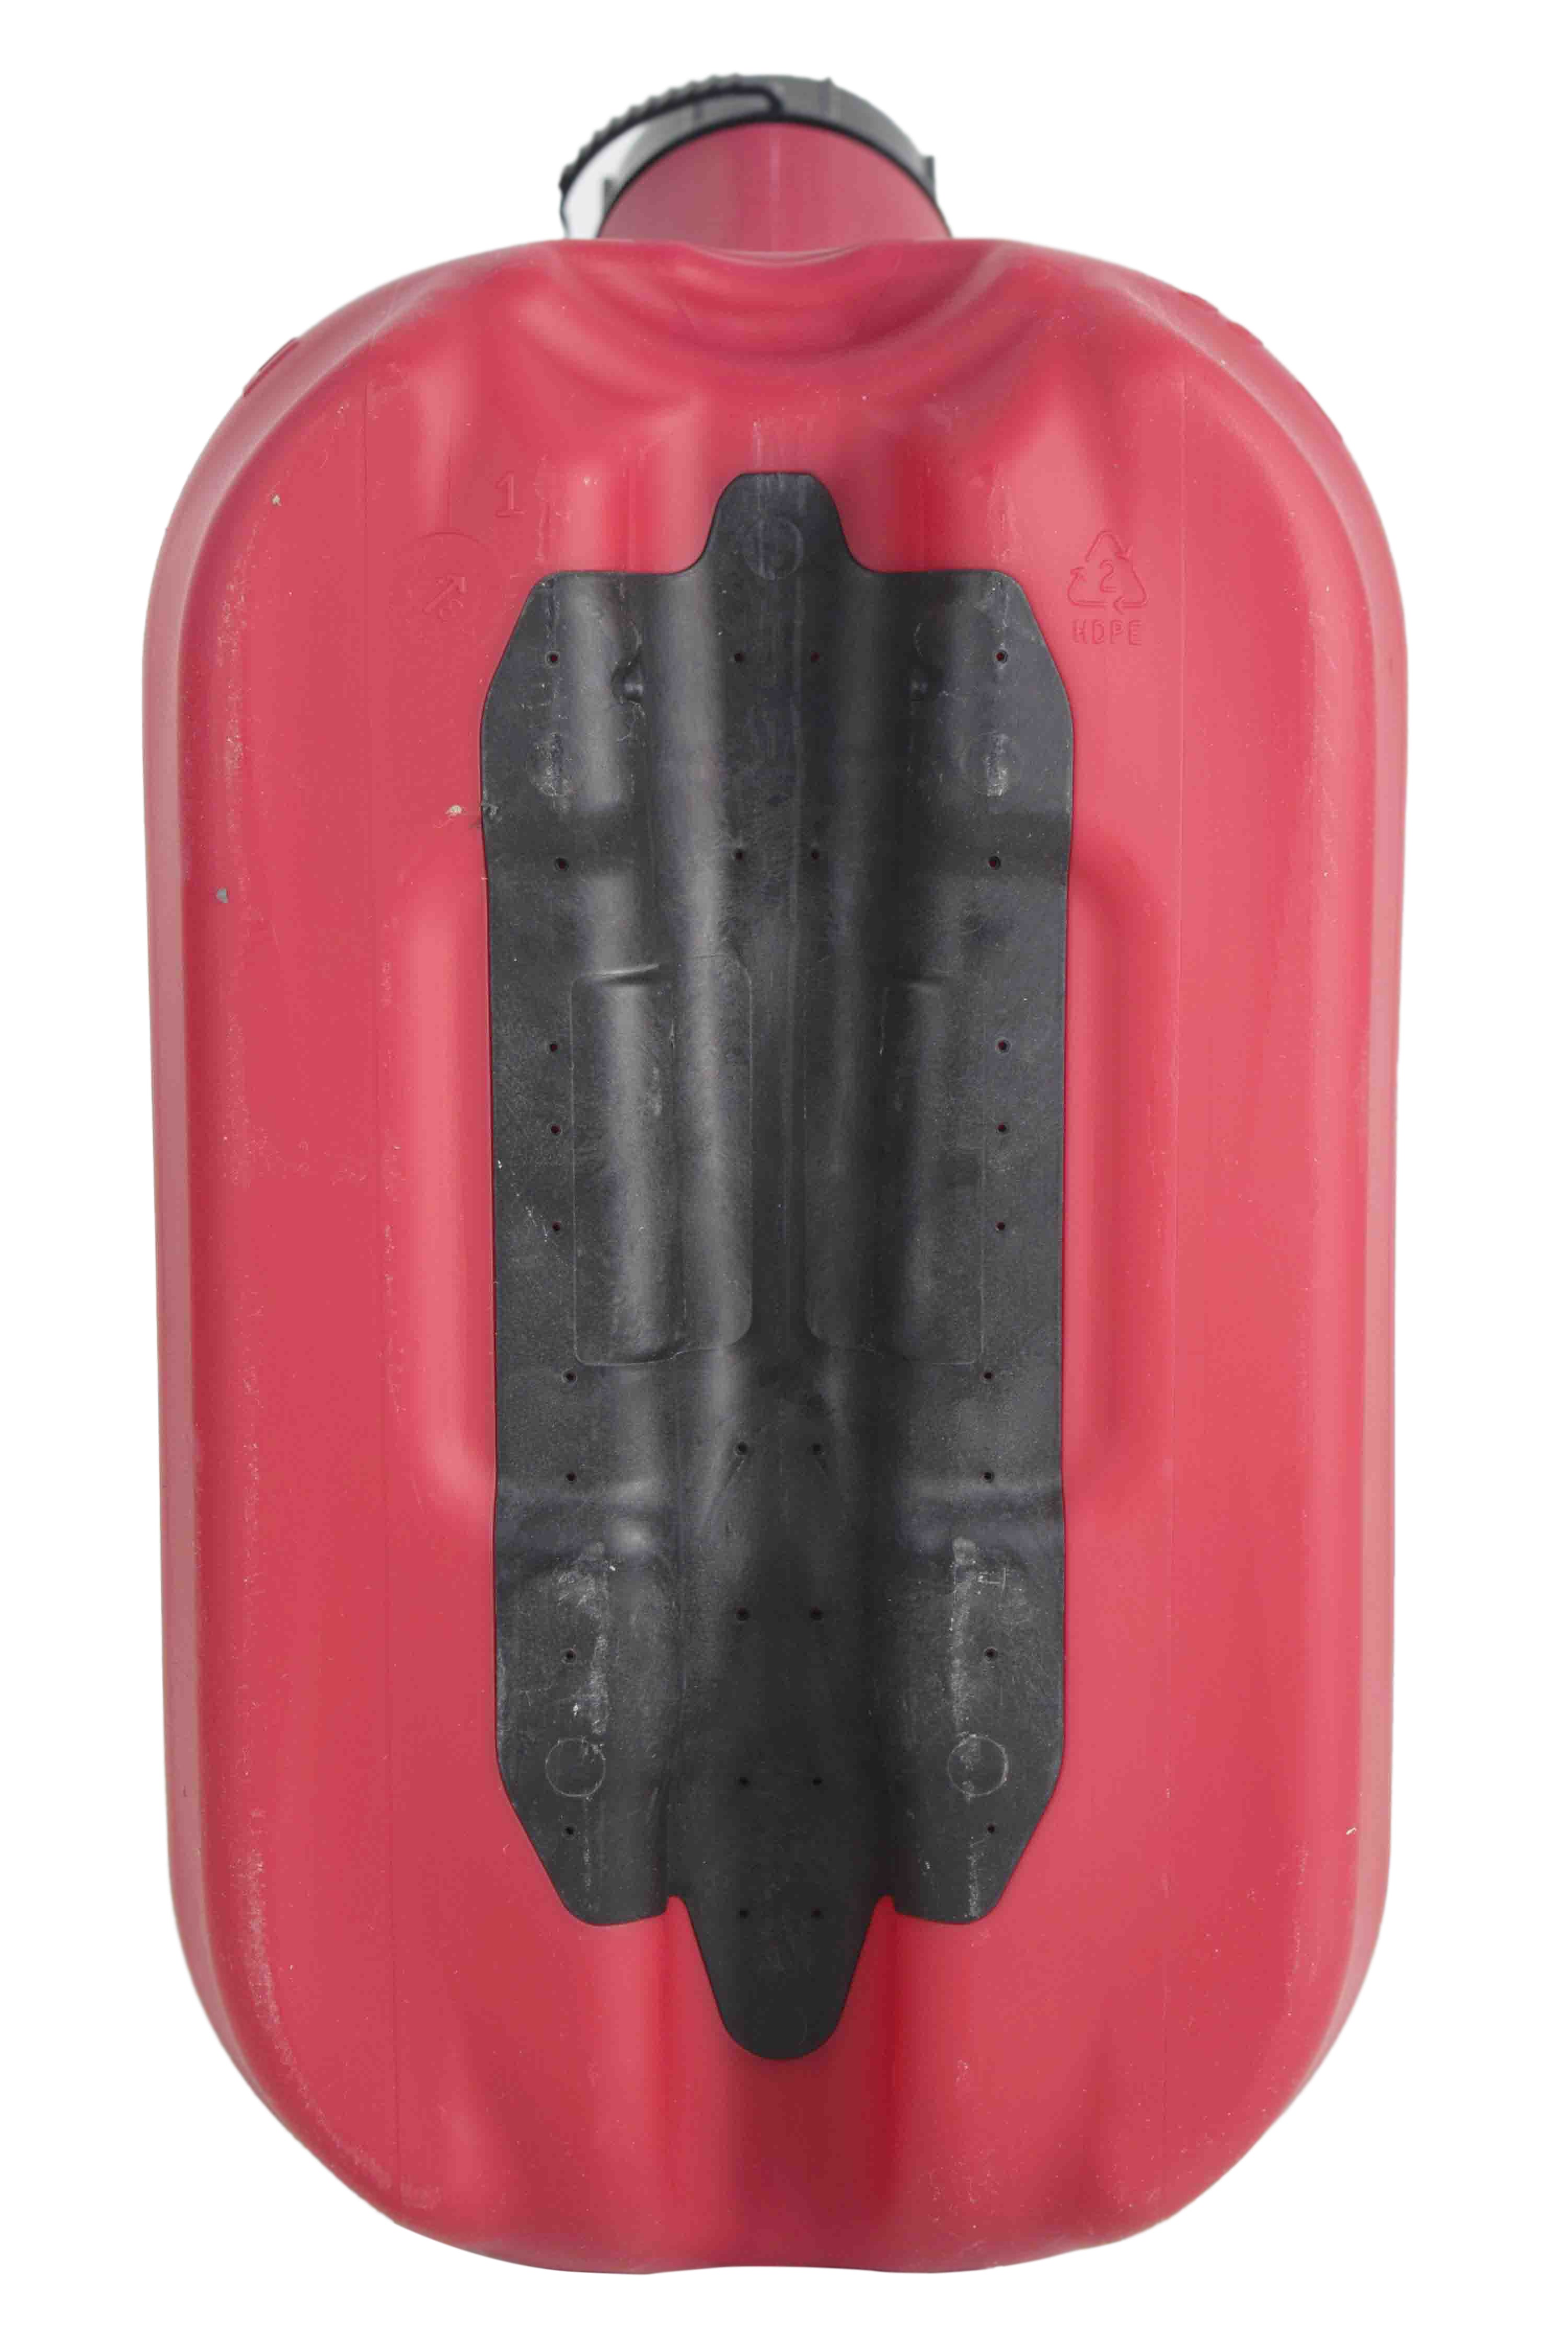 Fuelworx Red 2.5 Gallon Stackable Fast Pour Gas Fuel Cans CARB Compliant Made in The USA (2.5 Gallon Gas 3-Pack)